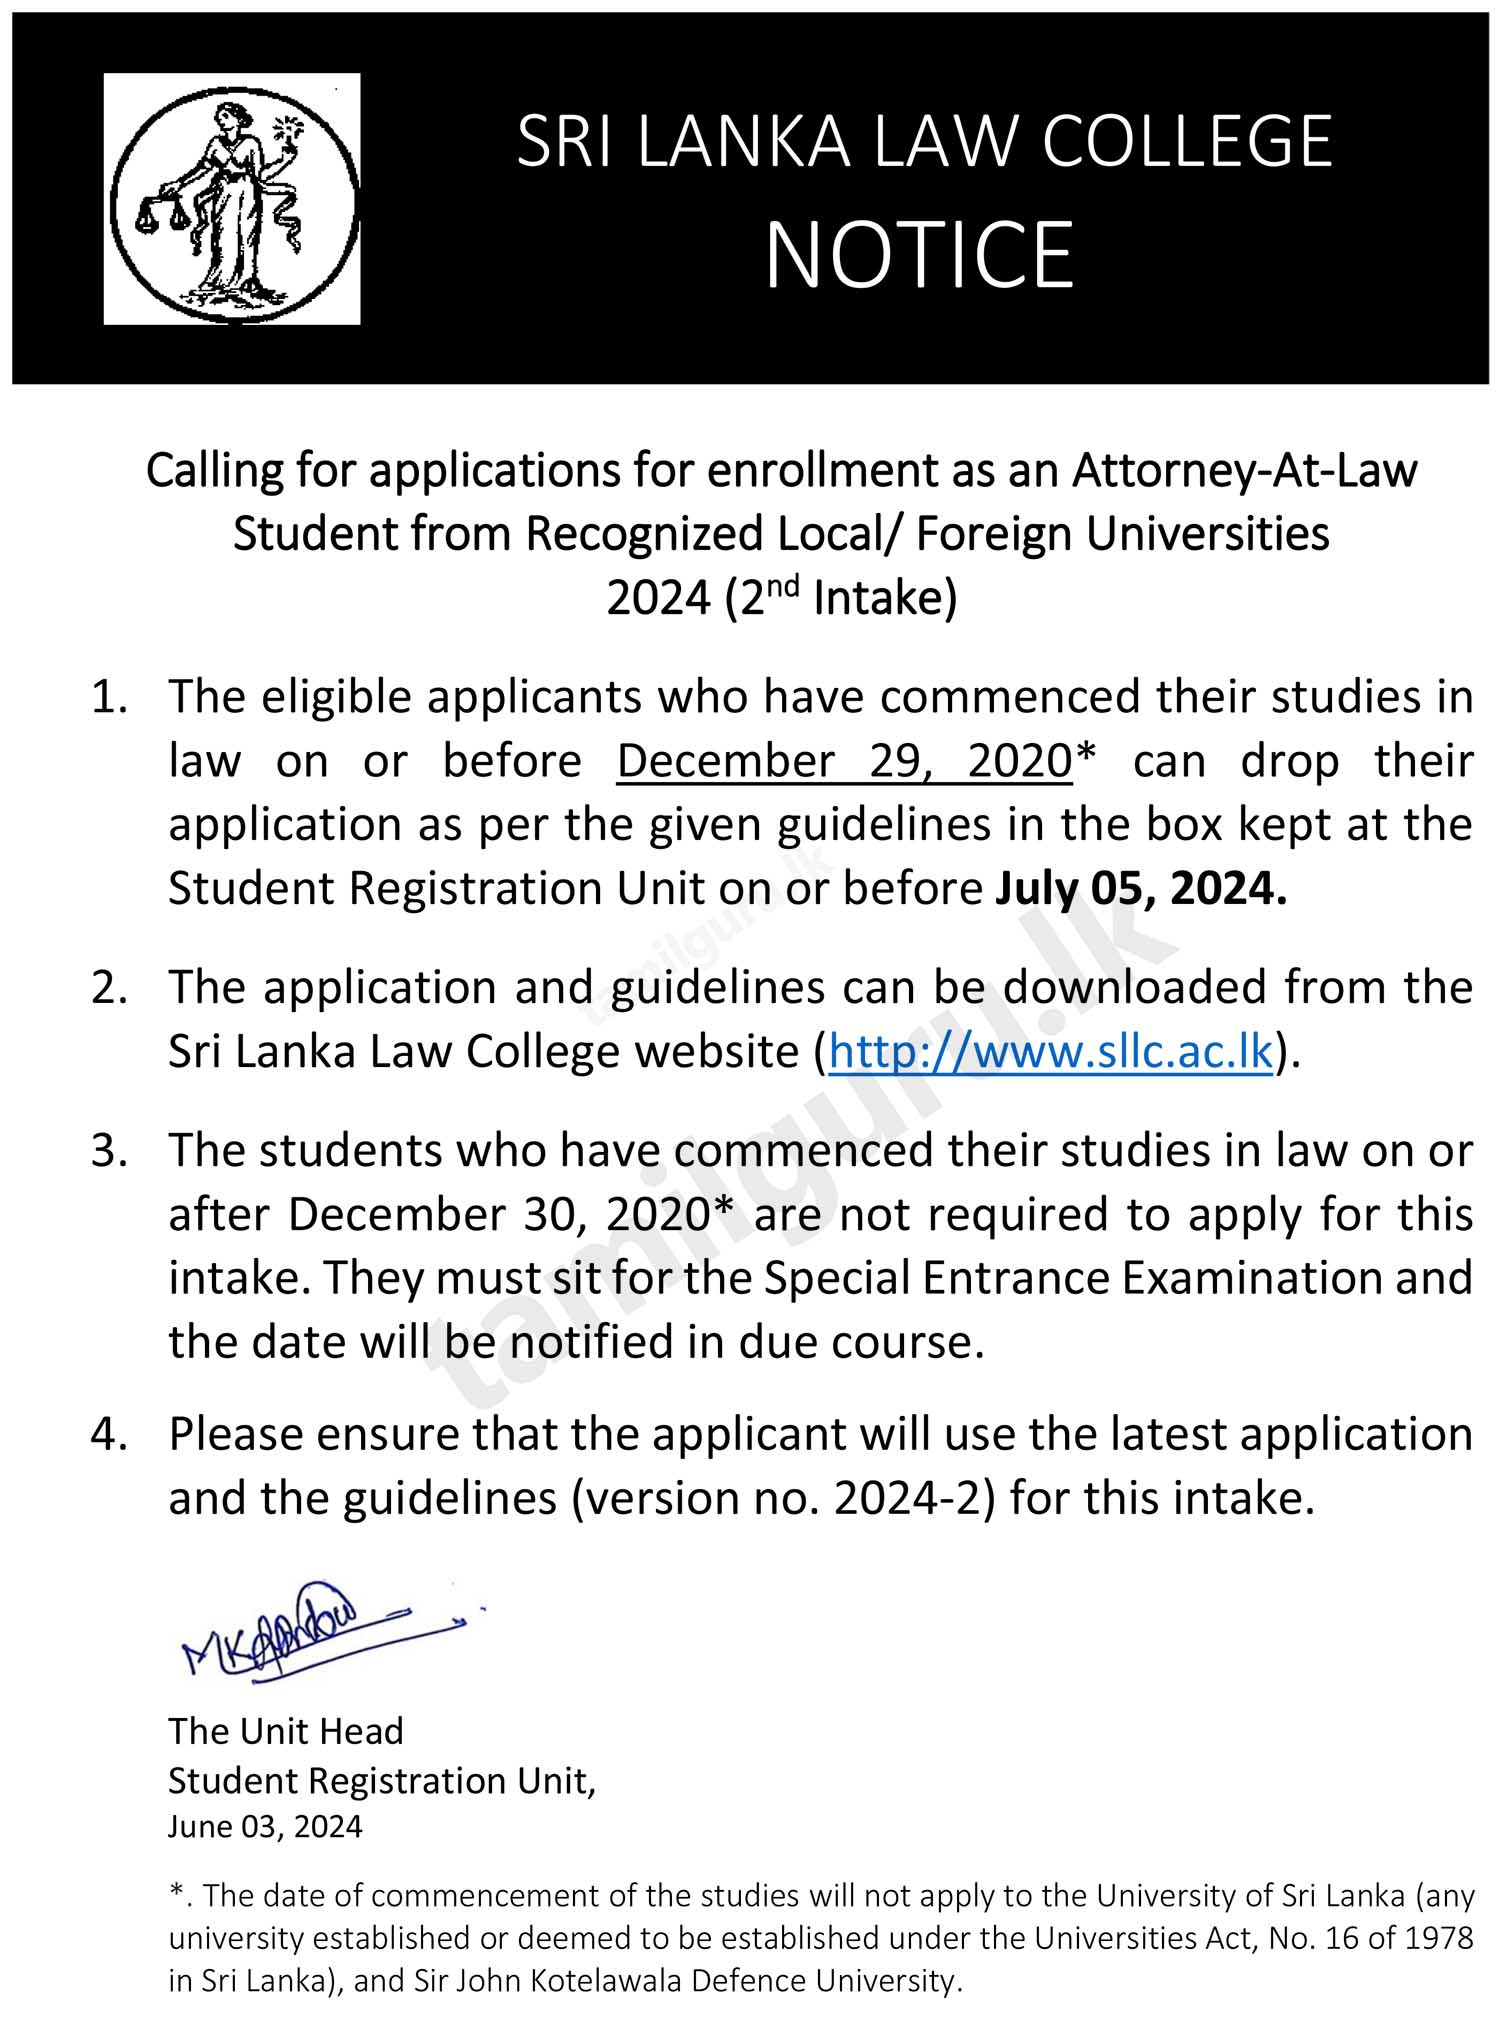 Sri Lanka Law College (SLLC) Admission for LLB Graduates and Barristers - 2024 2nd Intake